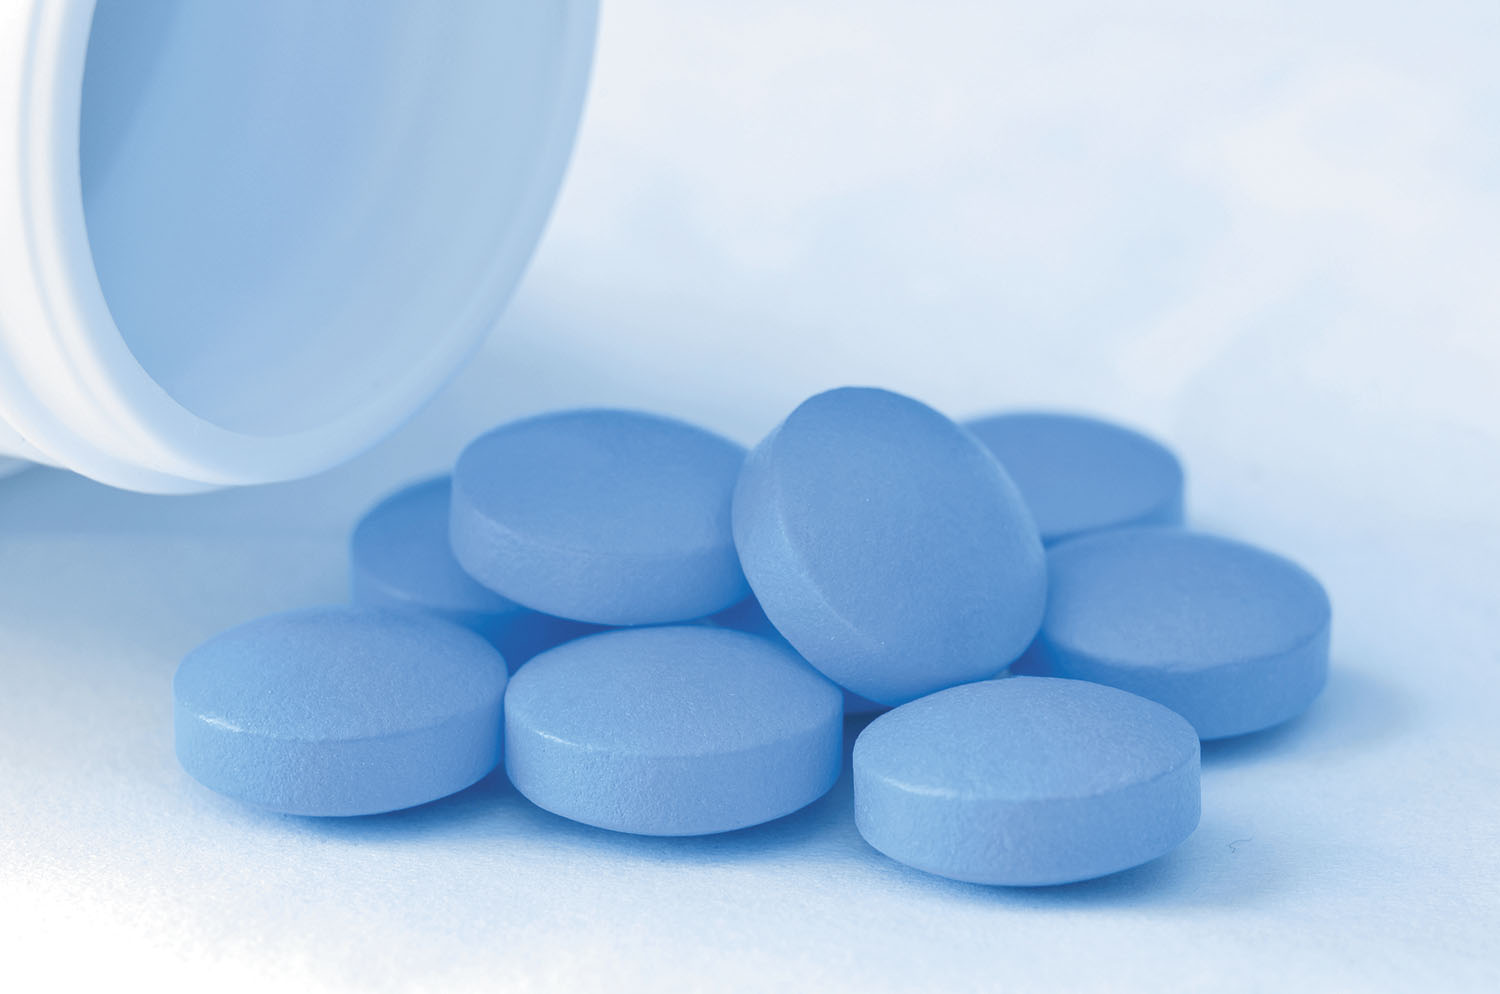 The Viagra pill will save your relationship!